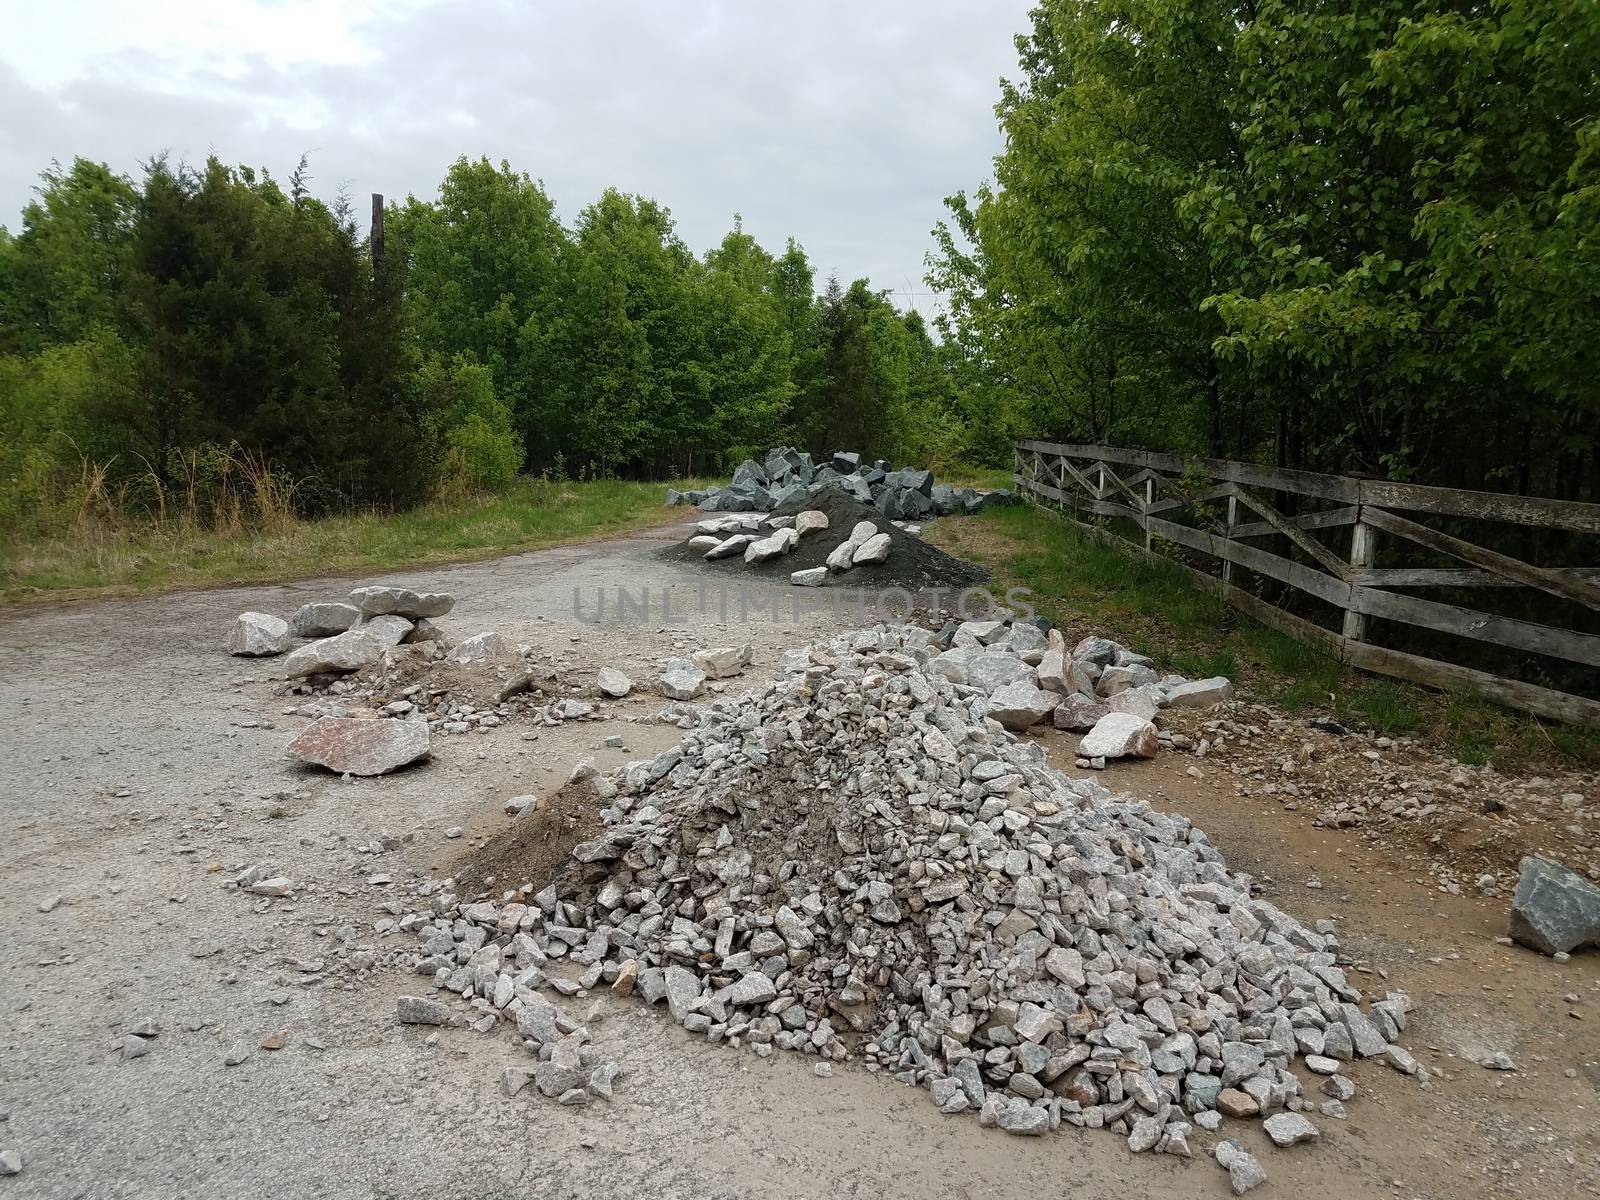 asphalt street or road with piles of grey rocks or stones and trees